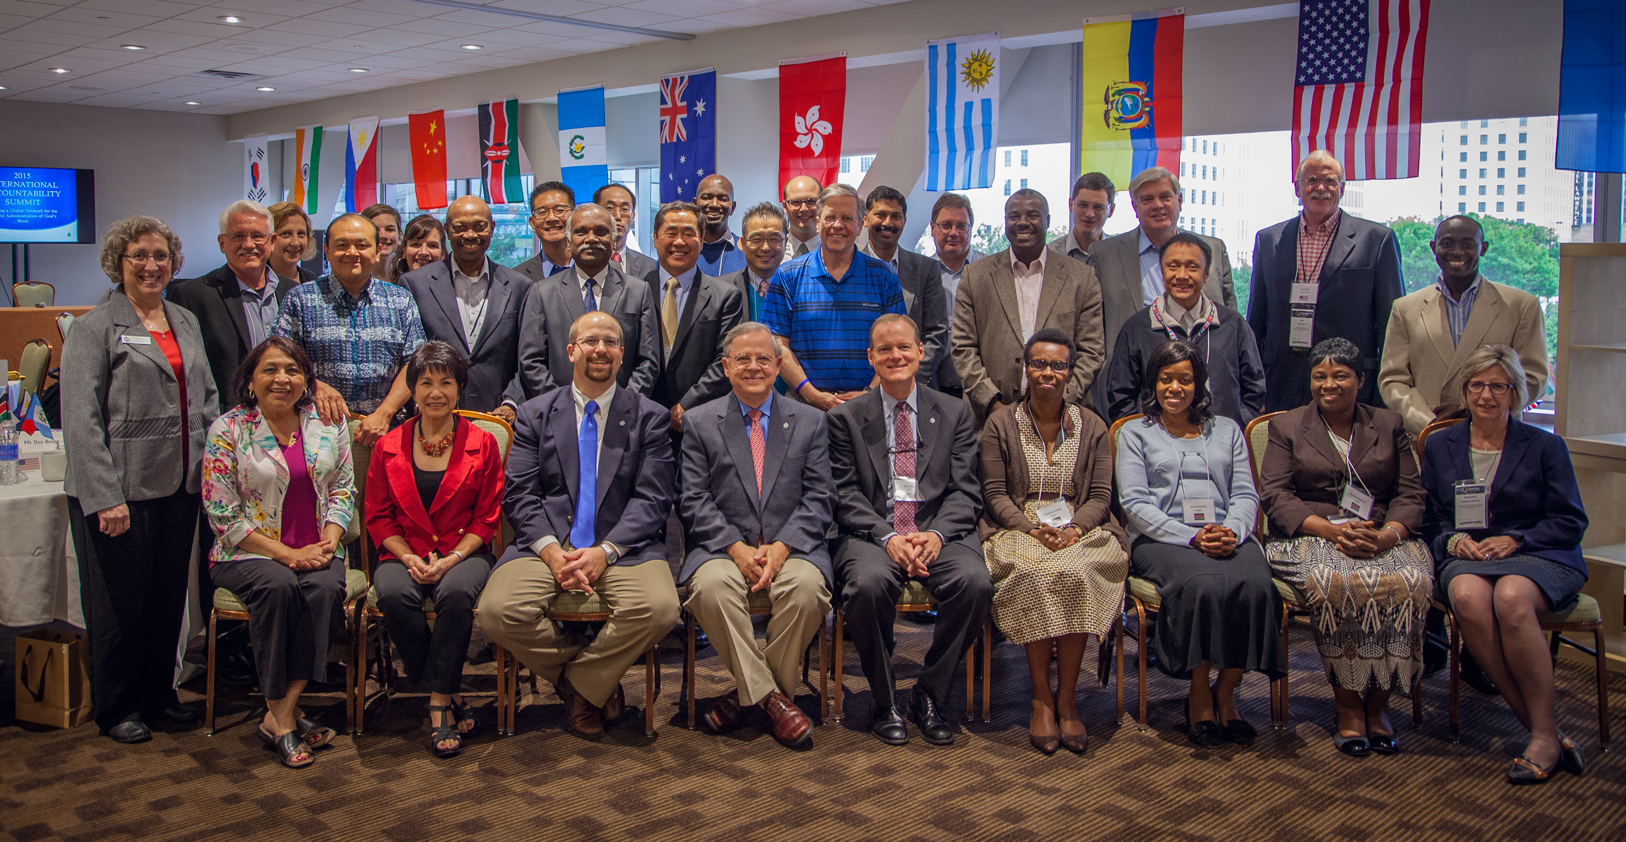 Participants of the First International Accountability Summit (IAS) in Dallas, Texas, April 2015